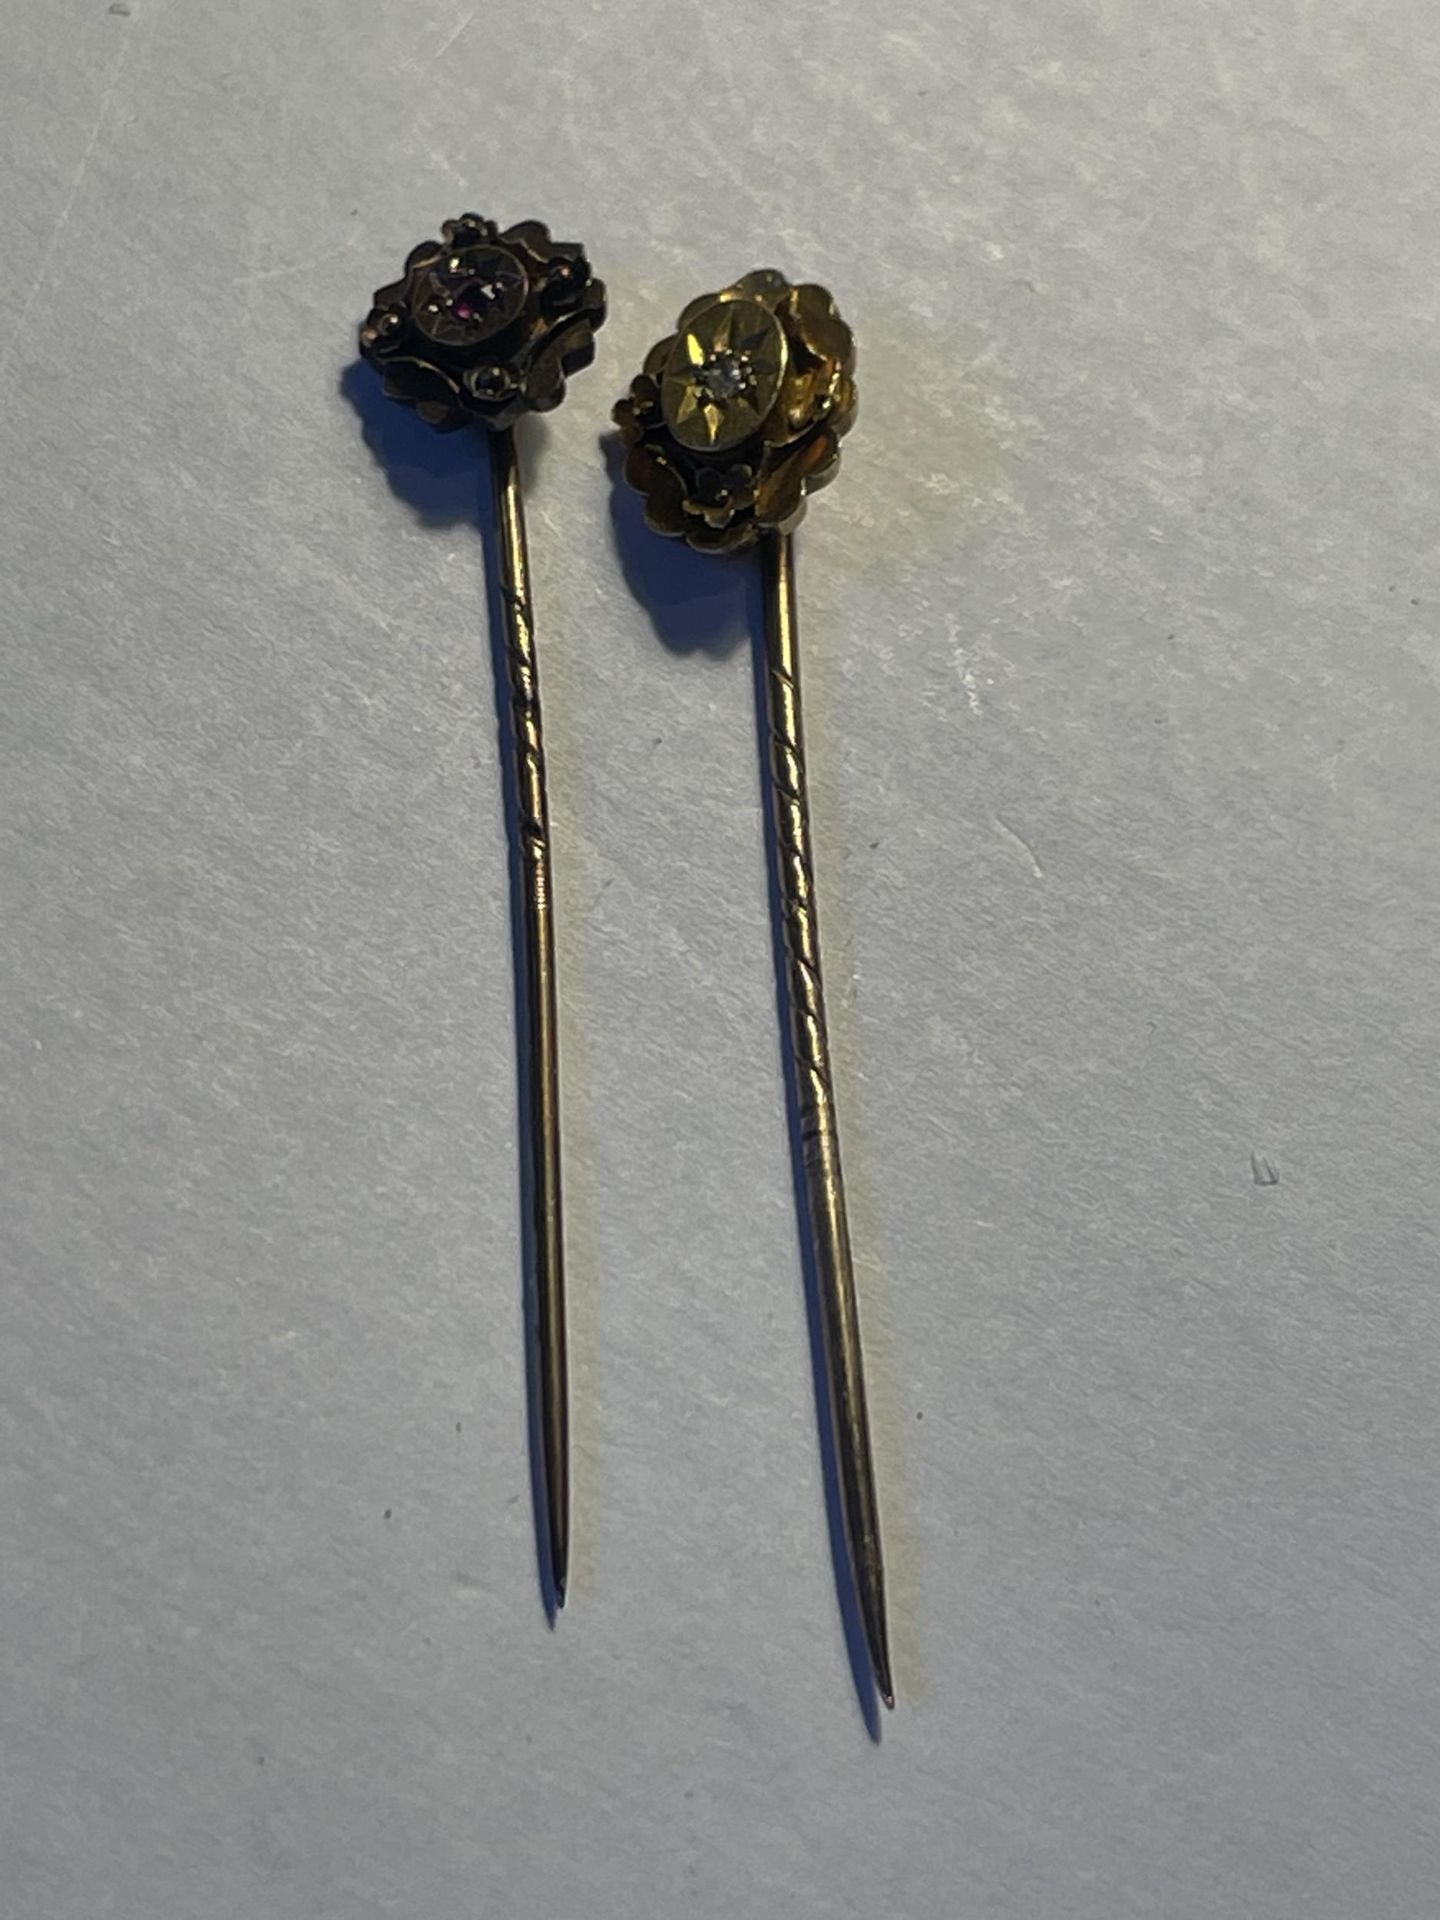 TWO 9 CARAT GOLD STICK PINS GROSS WEIGHT 2.43 GRAMS IN A VINTAGE PRESENTATION CASE - Image 2 of 3